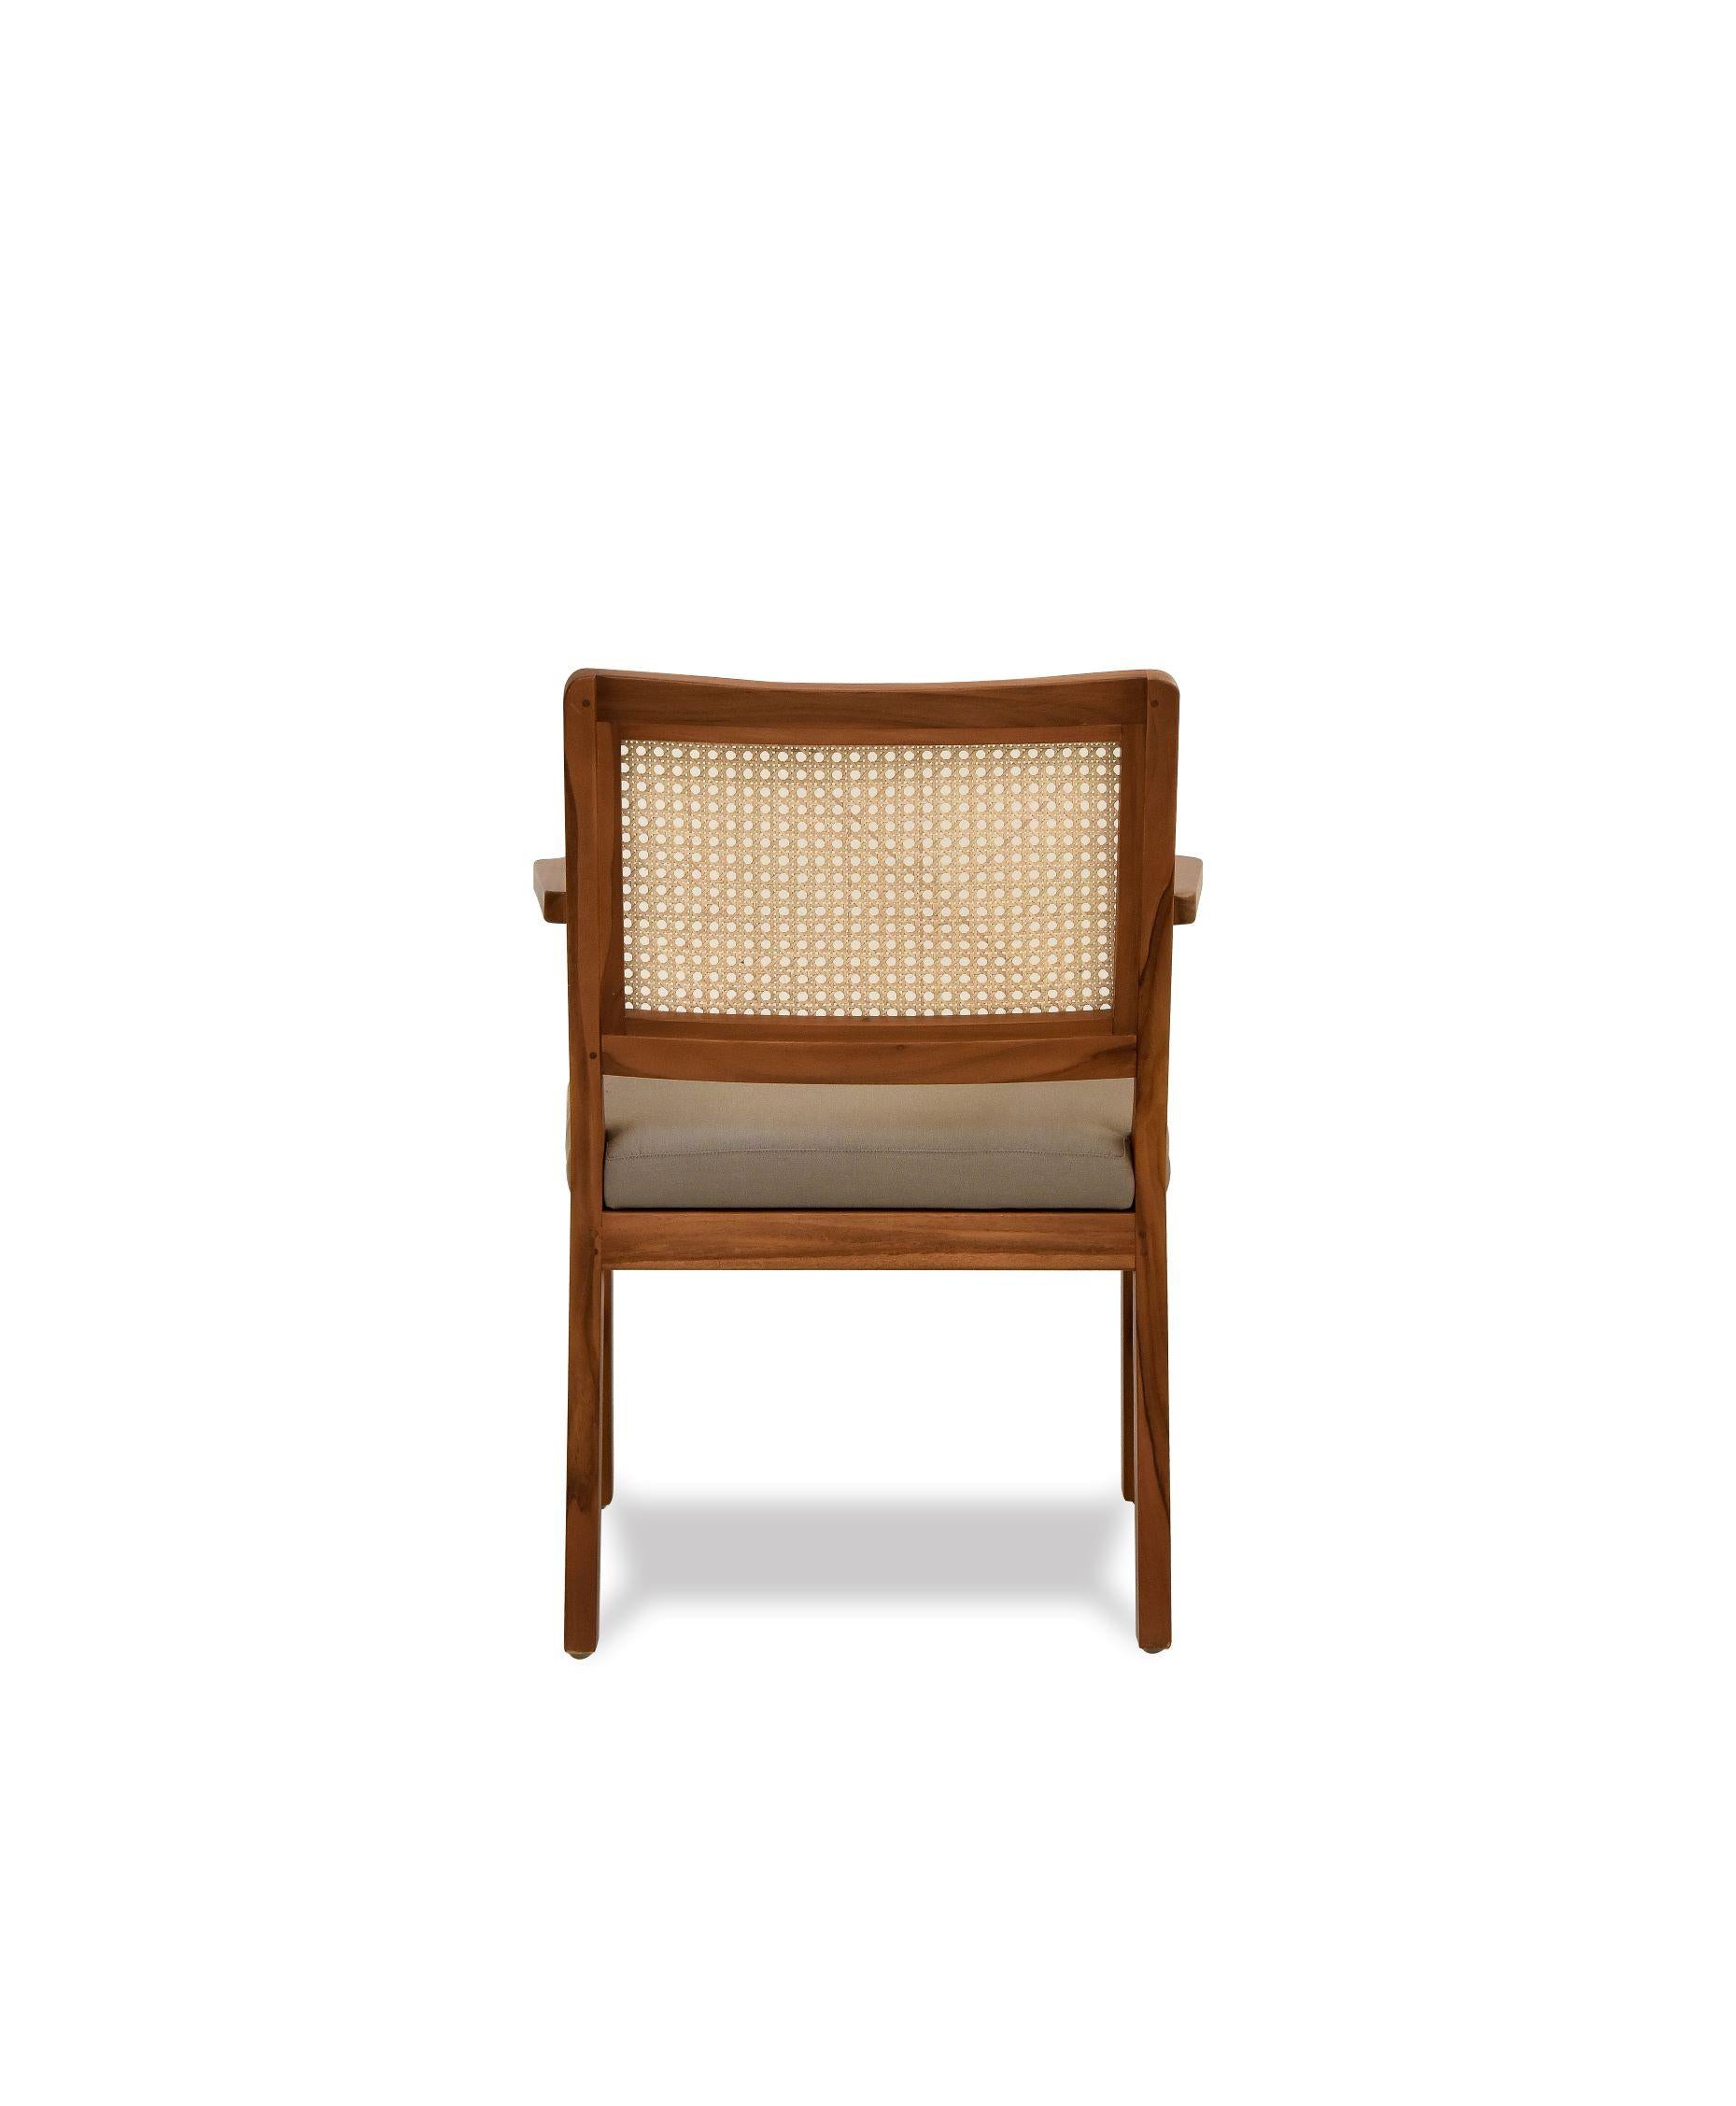 Rattan Teak Armchair with Woven Cane Back For Sale